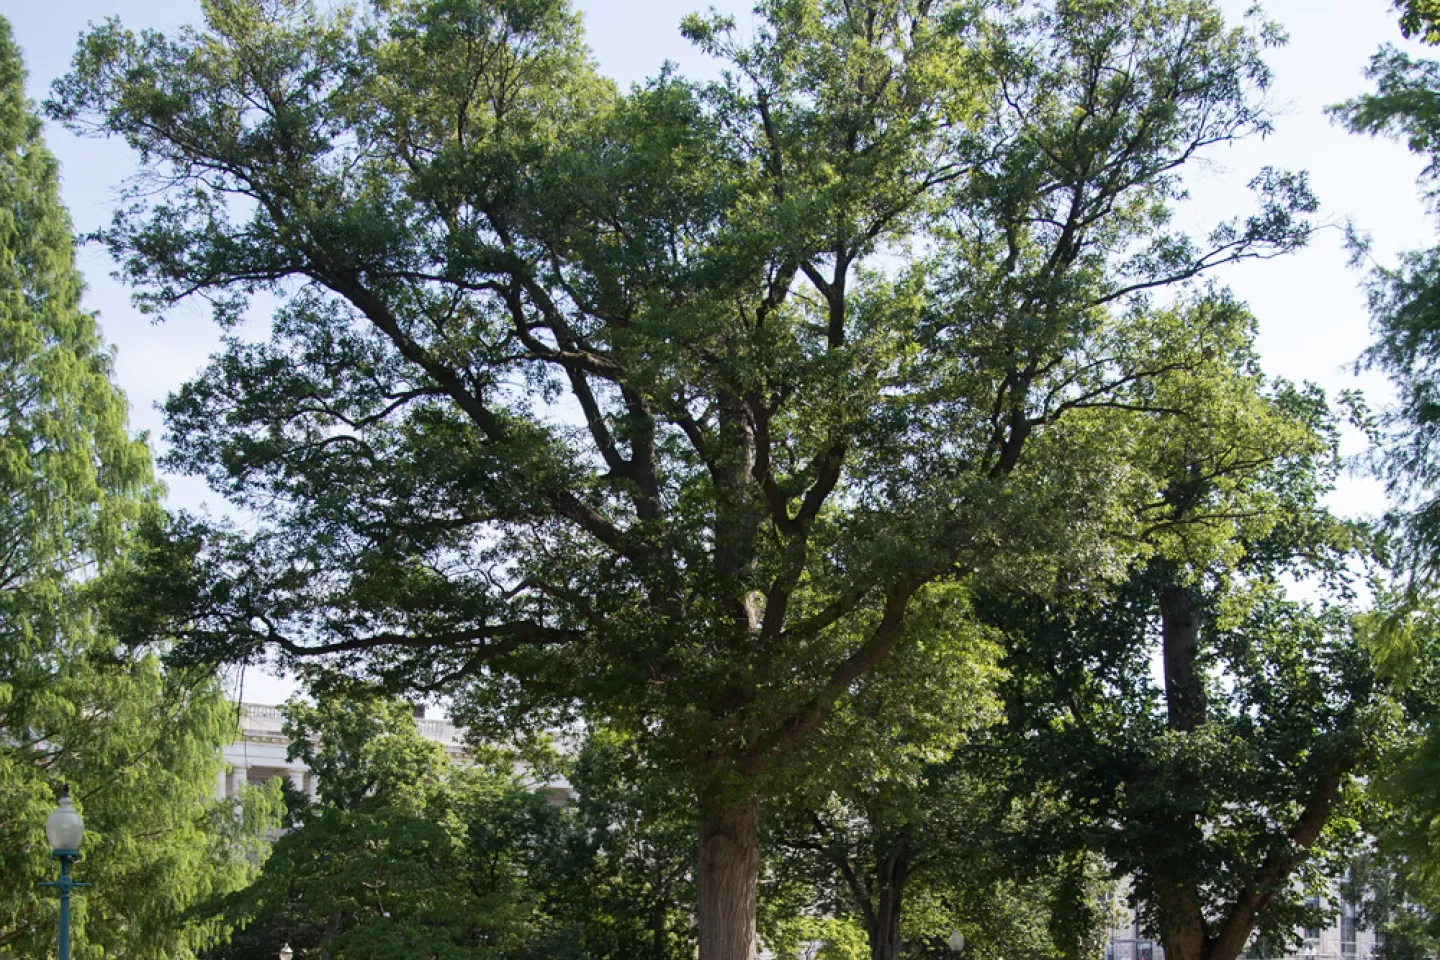 The Senator Gallinger tree on the U.S. Capitol Grounds during summer.